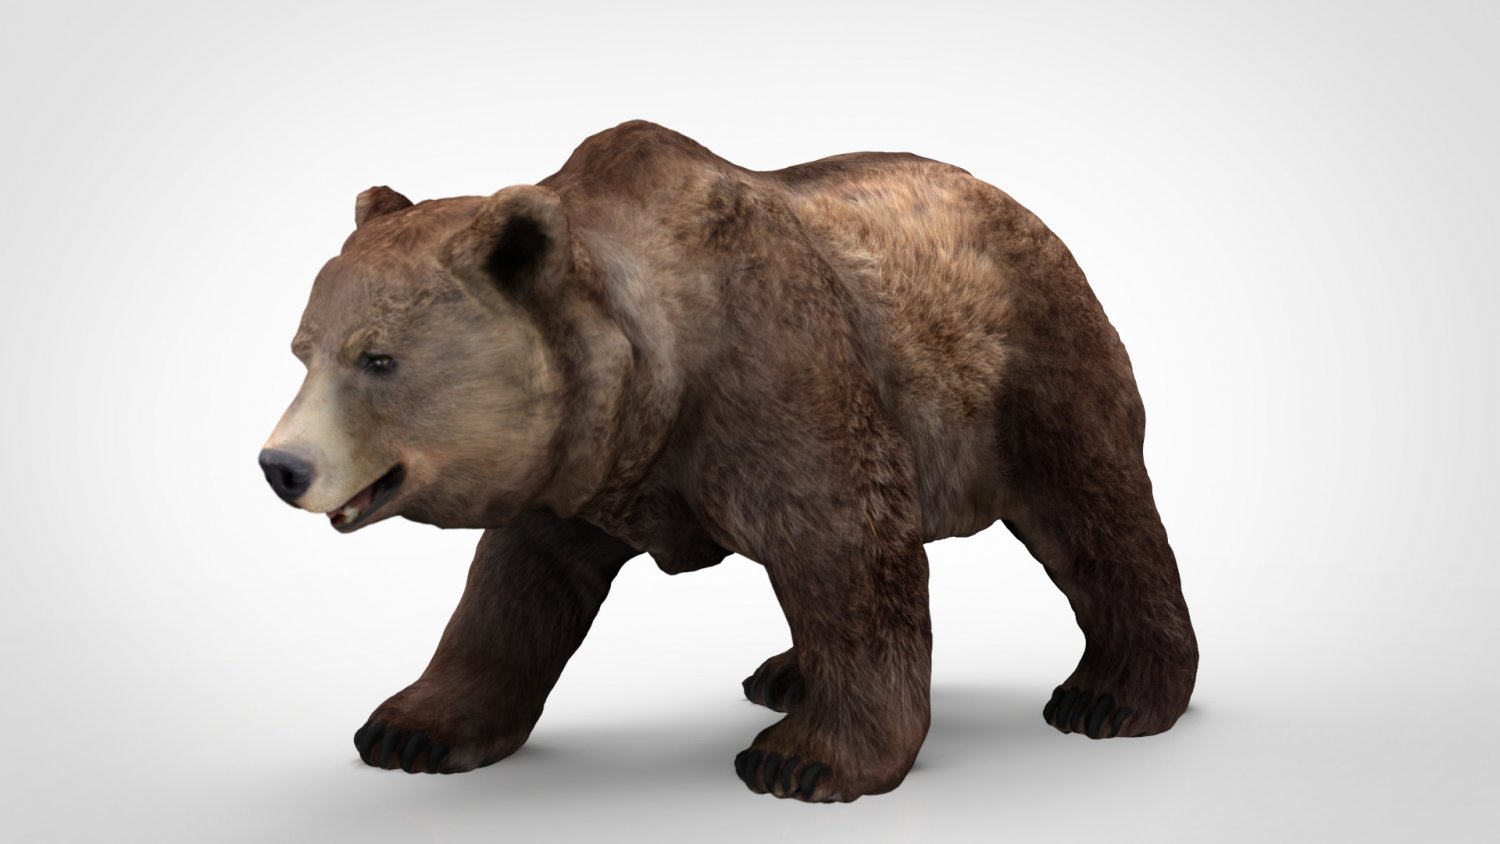 PBR Grizzly Bear - Modelling